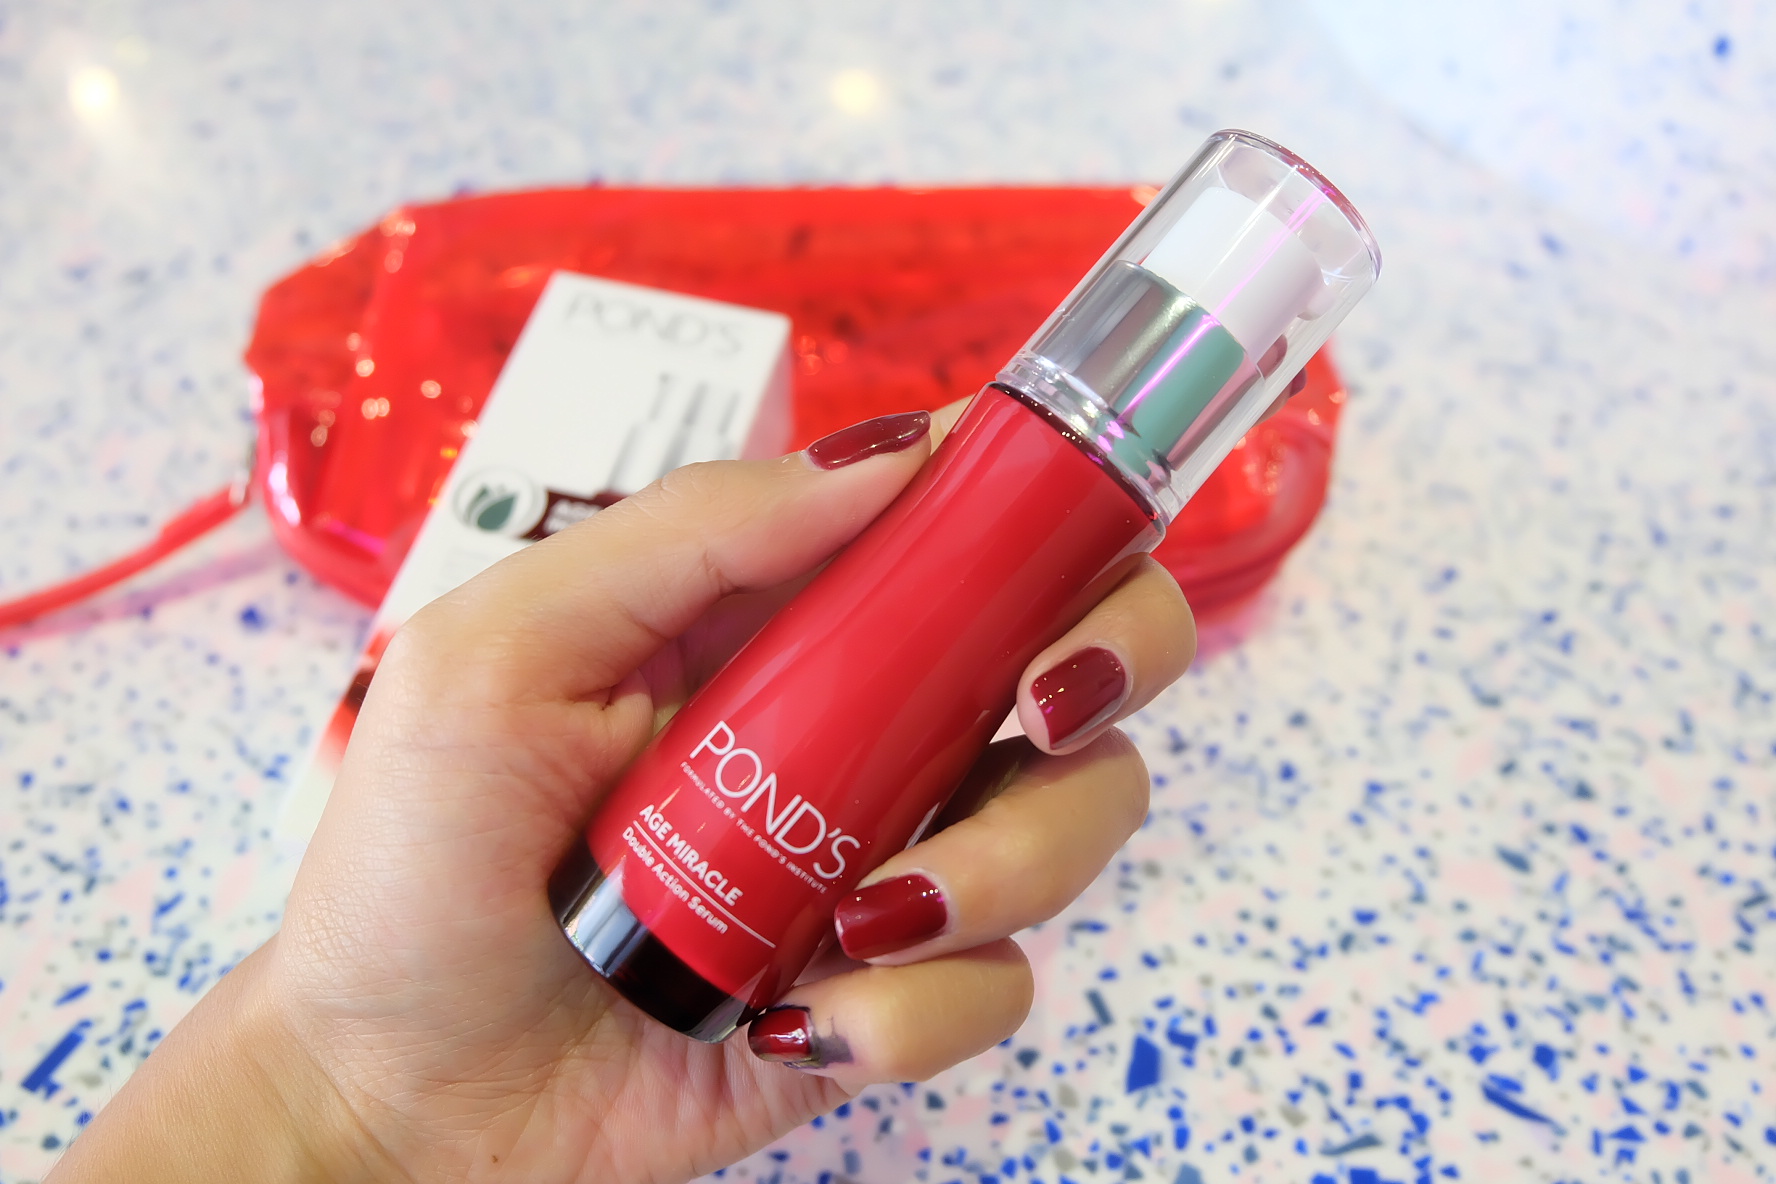 Review: POND'S Age Miracle Double Action Serum